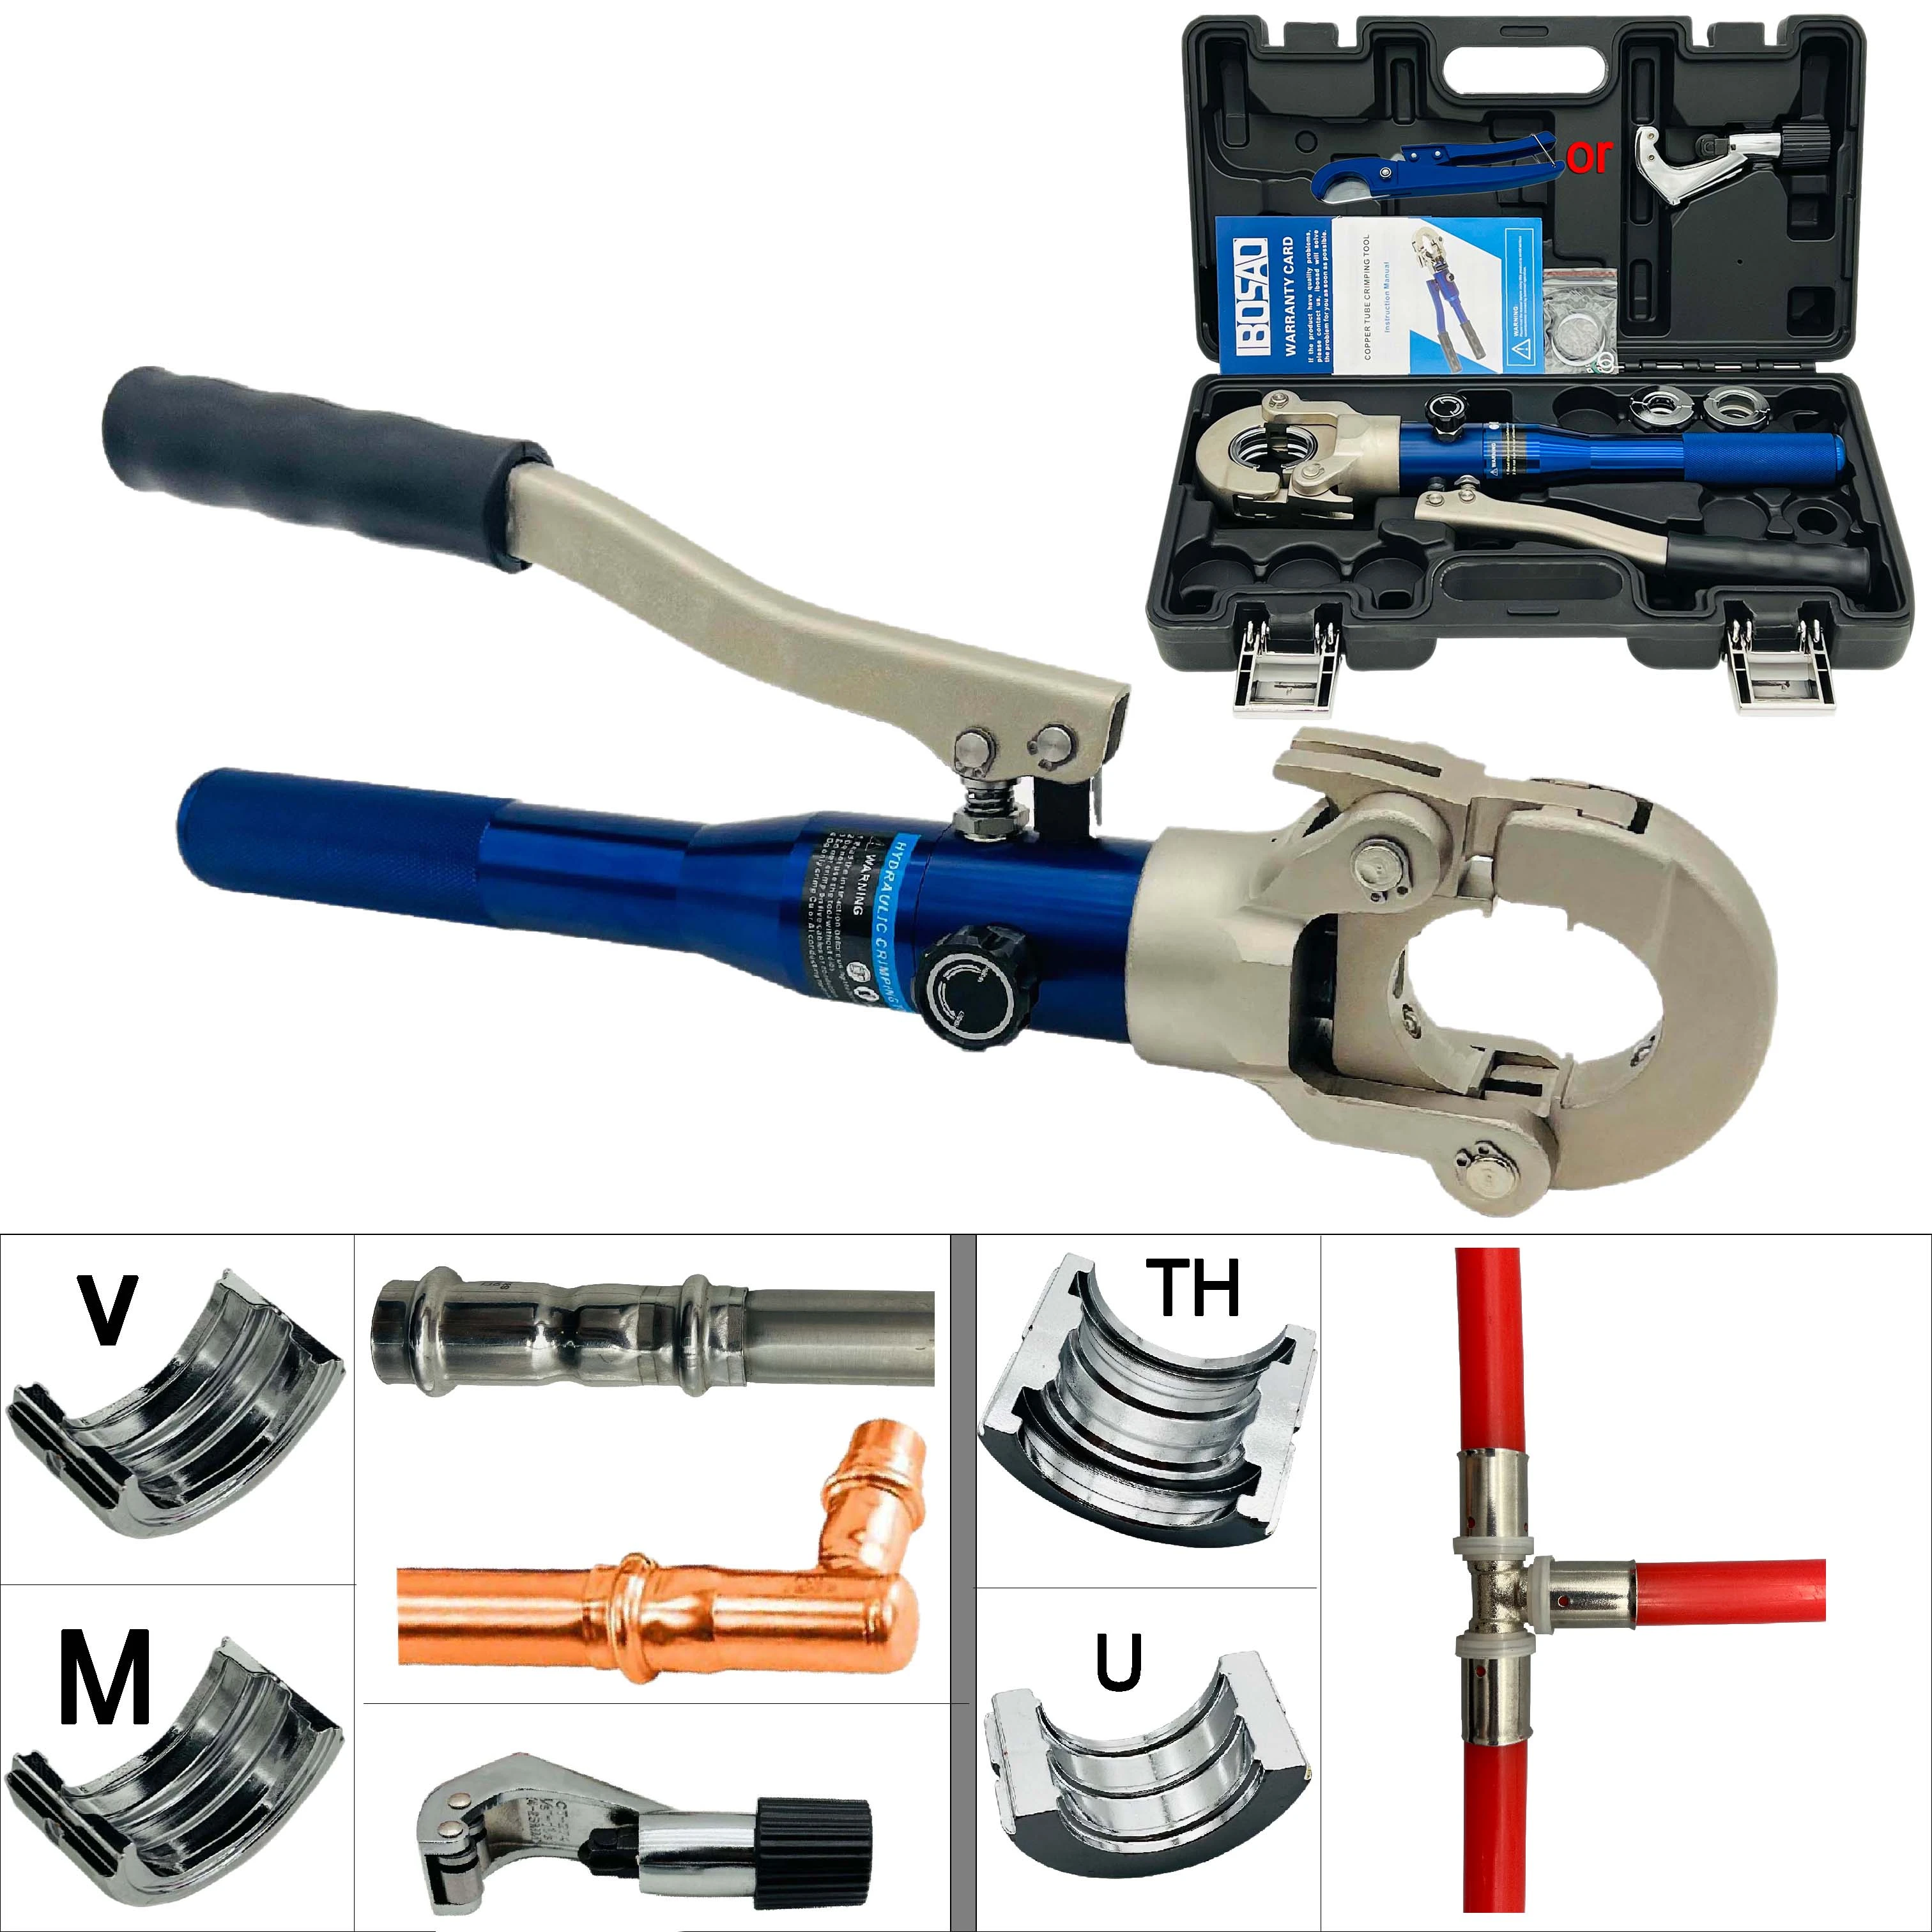 Hydraulic Pex Pipe Crimping Tools Pressing Plumbing Tools for Pex,Stainless Steel and Copper Pipe with TH,U,V,M,VUS,VAU jaws